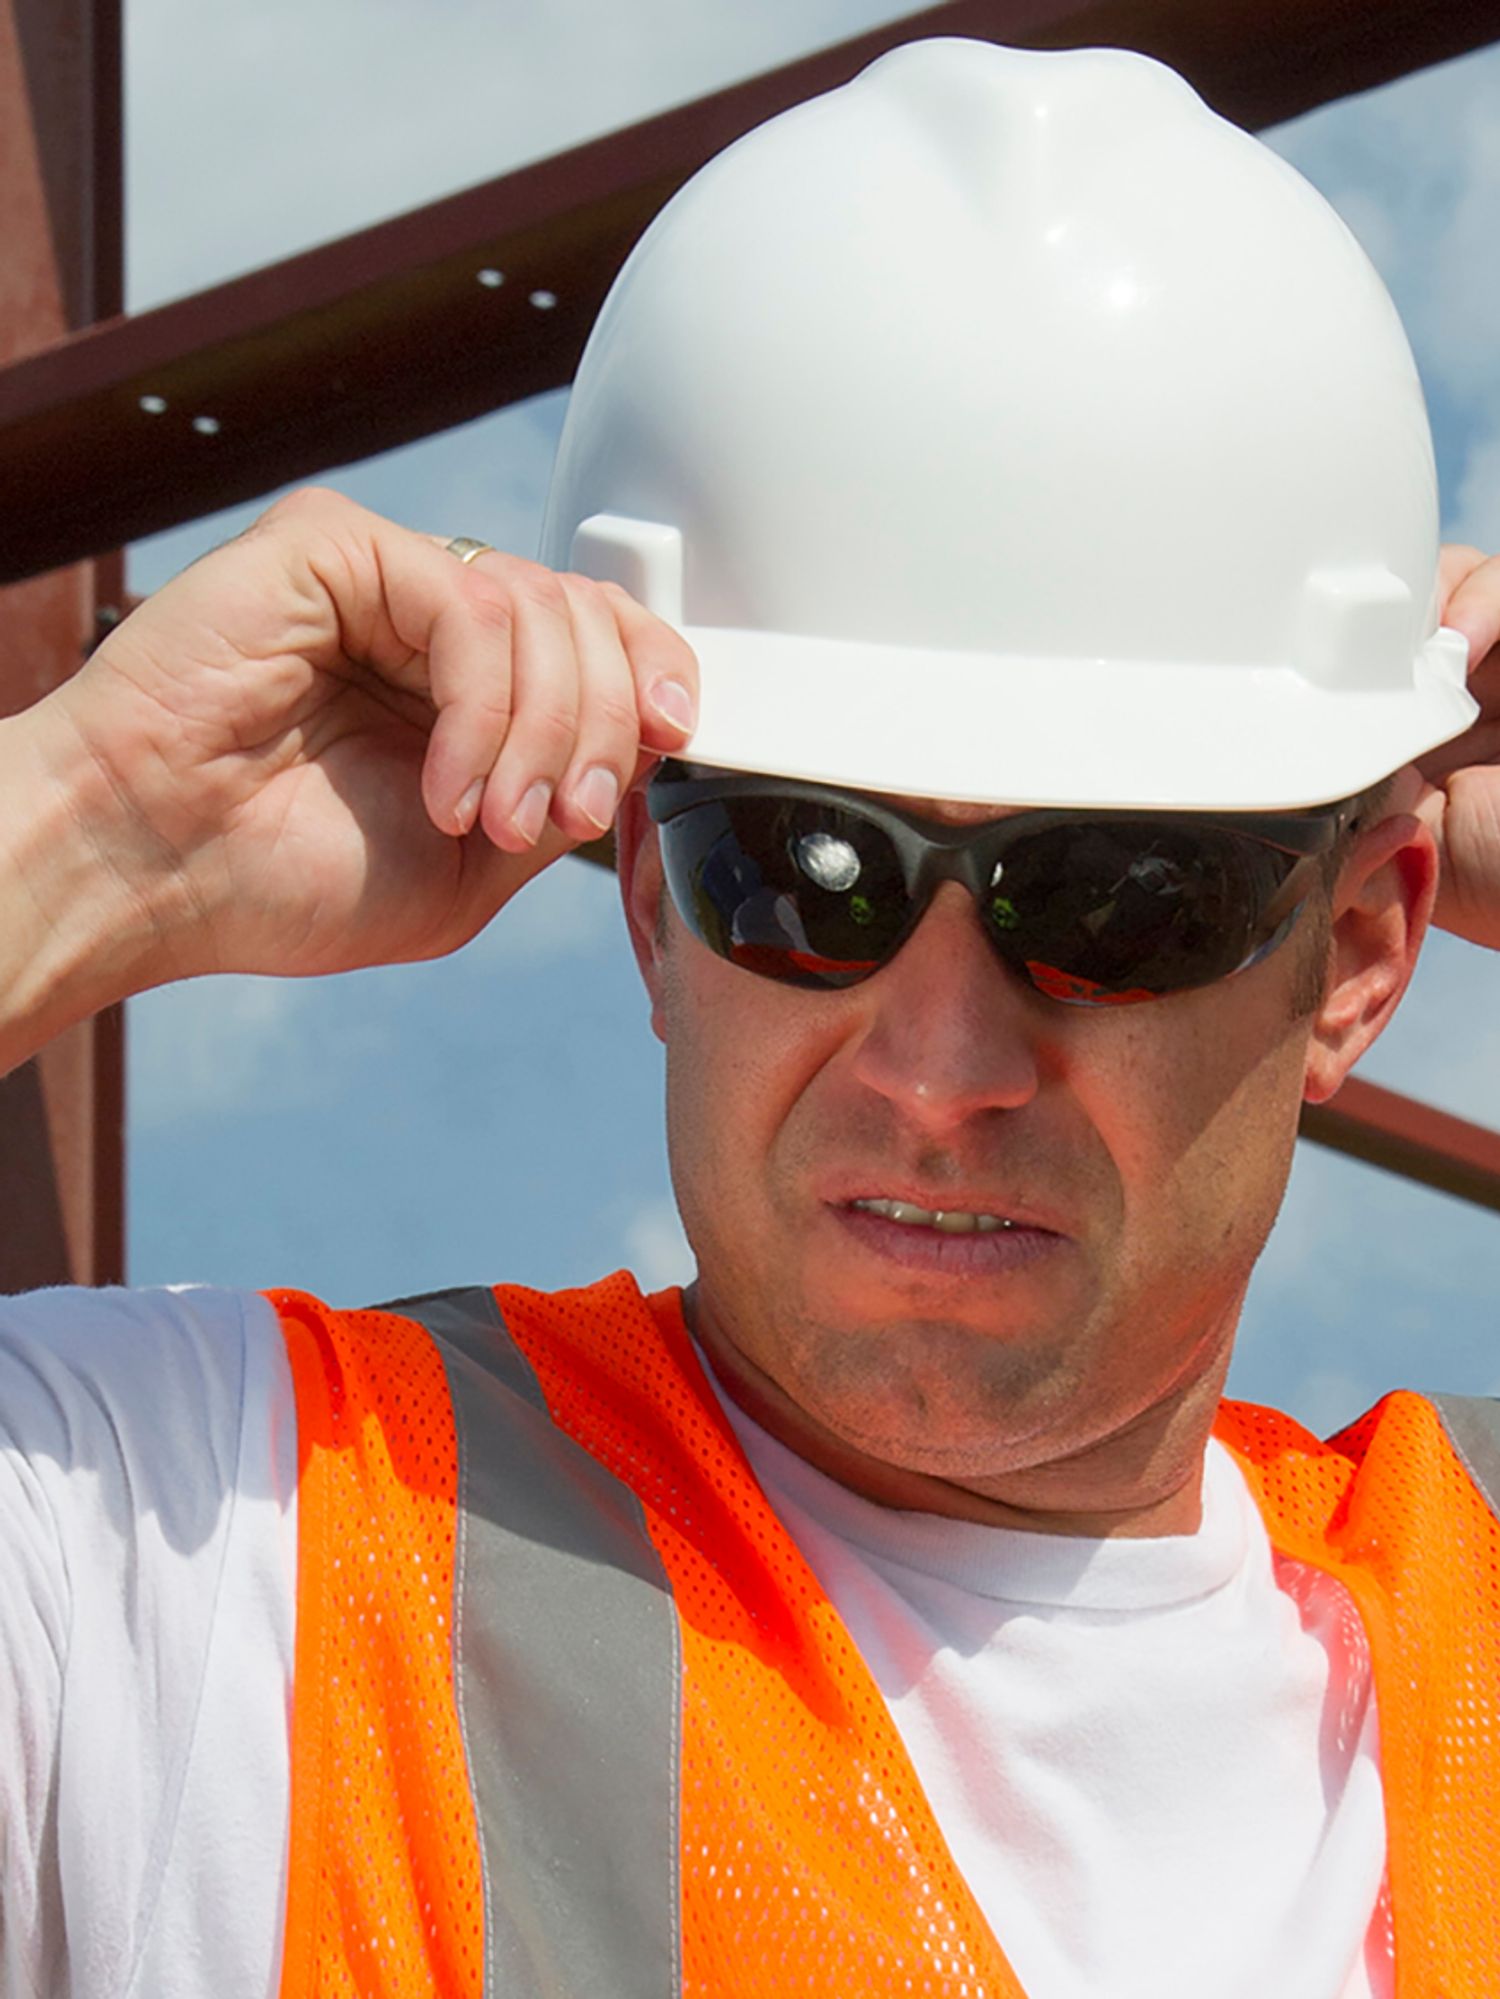 What types of head protection must your workers wear?